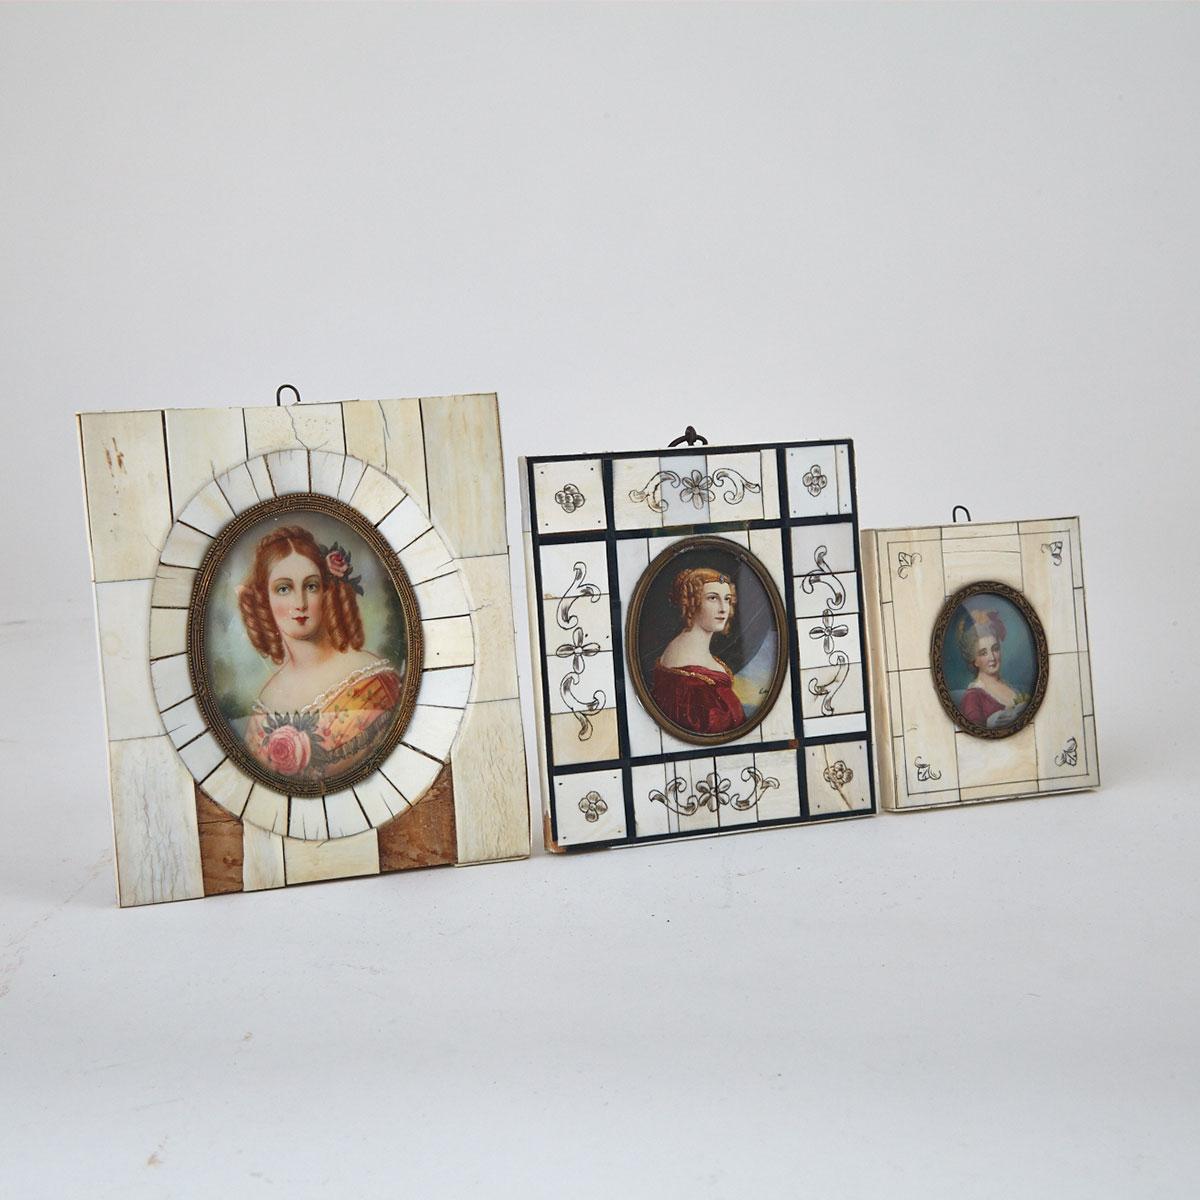 Three French School Portrait Miniatures on Ivory of Noble Women, 19th century